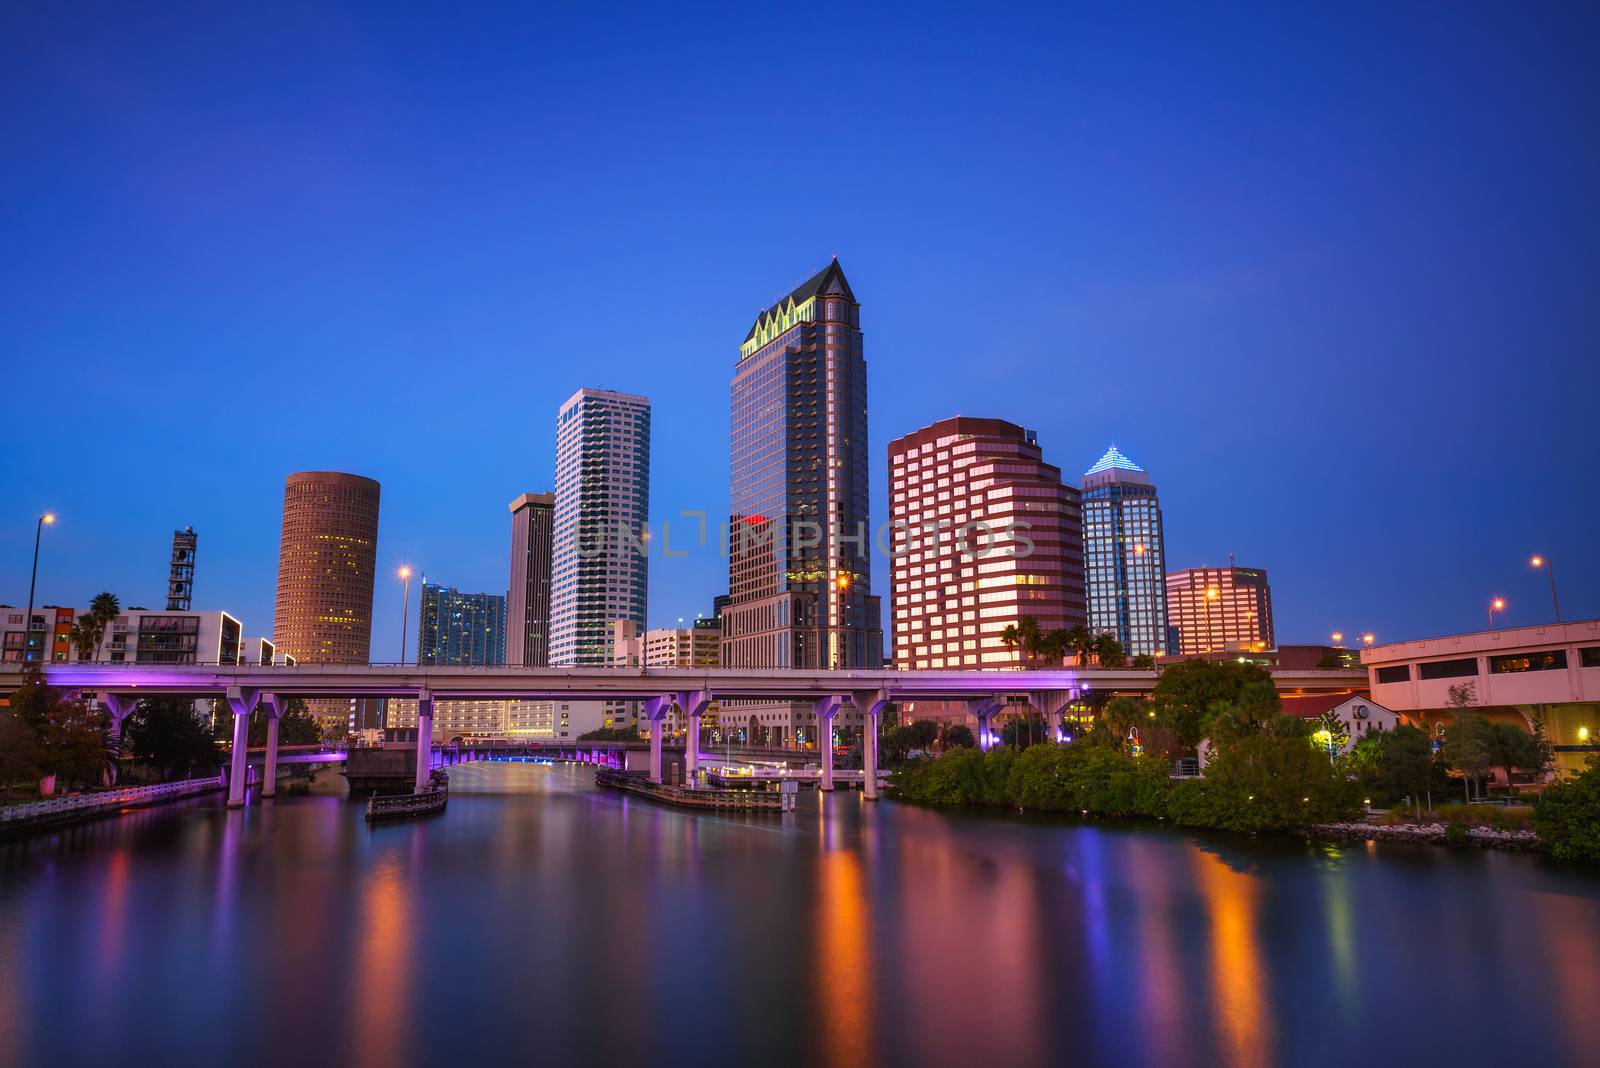 The skyline of downtown Tampa after sunset with Hillsborough river in the foreground. Long exposure.